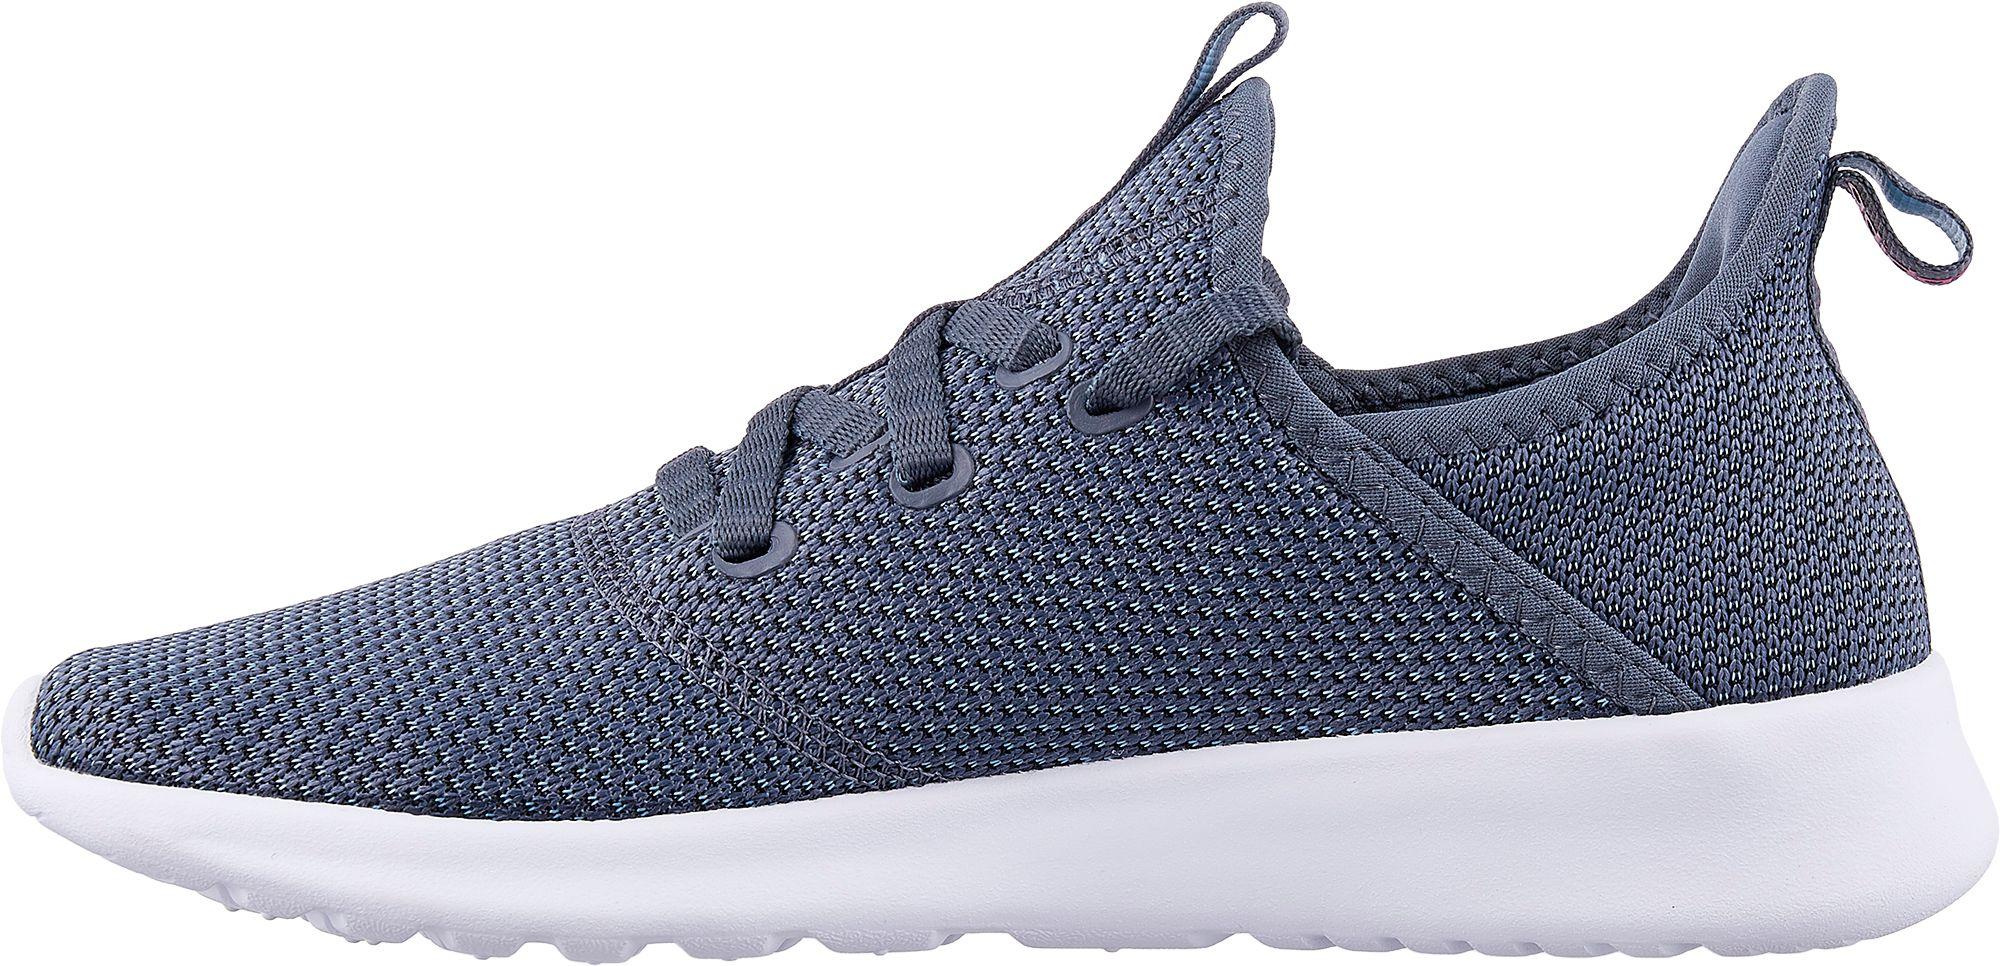 adidas Cloudfoam Pure Shoes in Teal/Blue/White (Blue) | Lyst